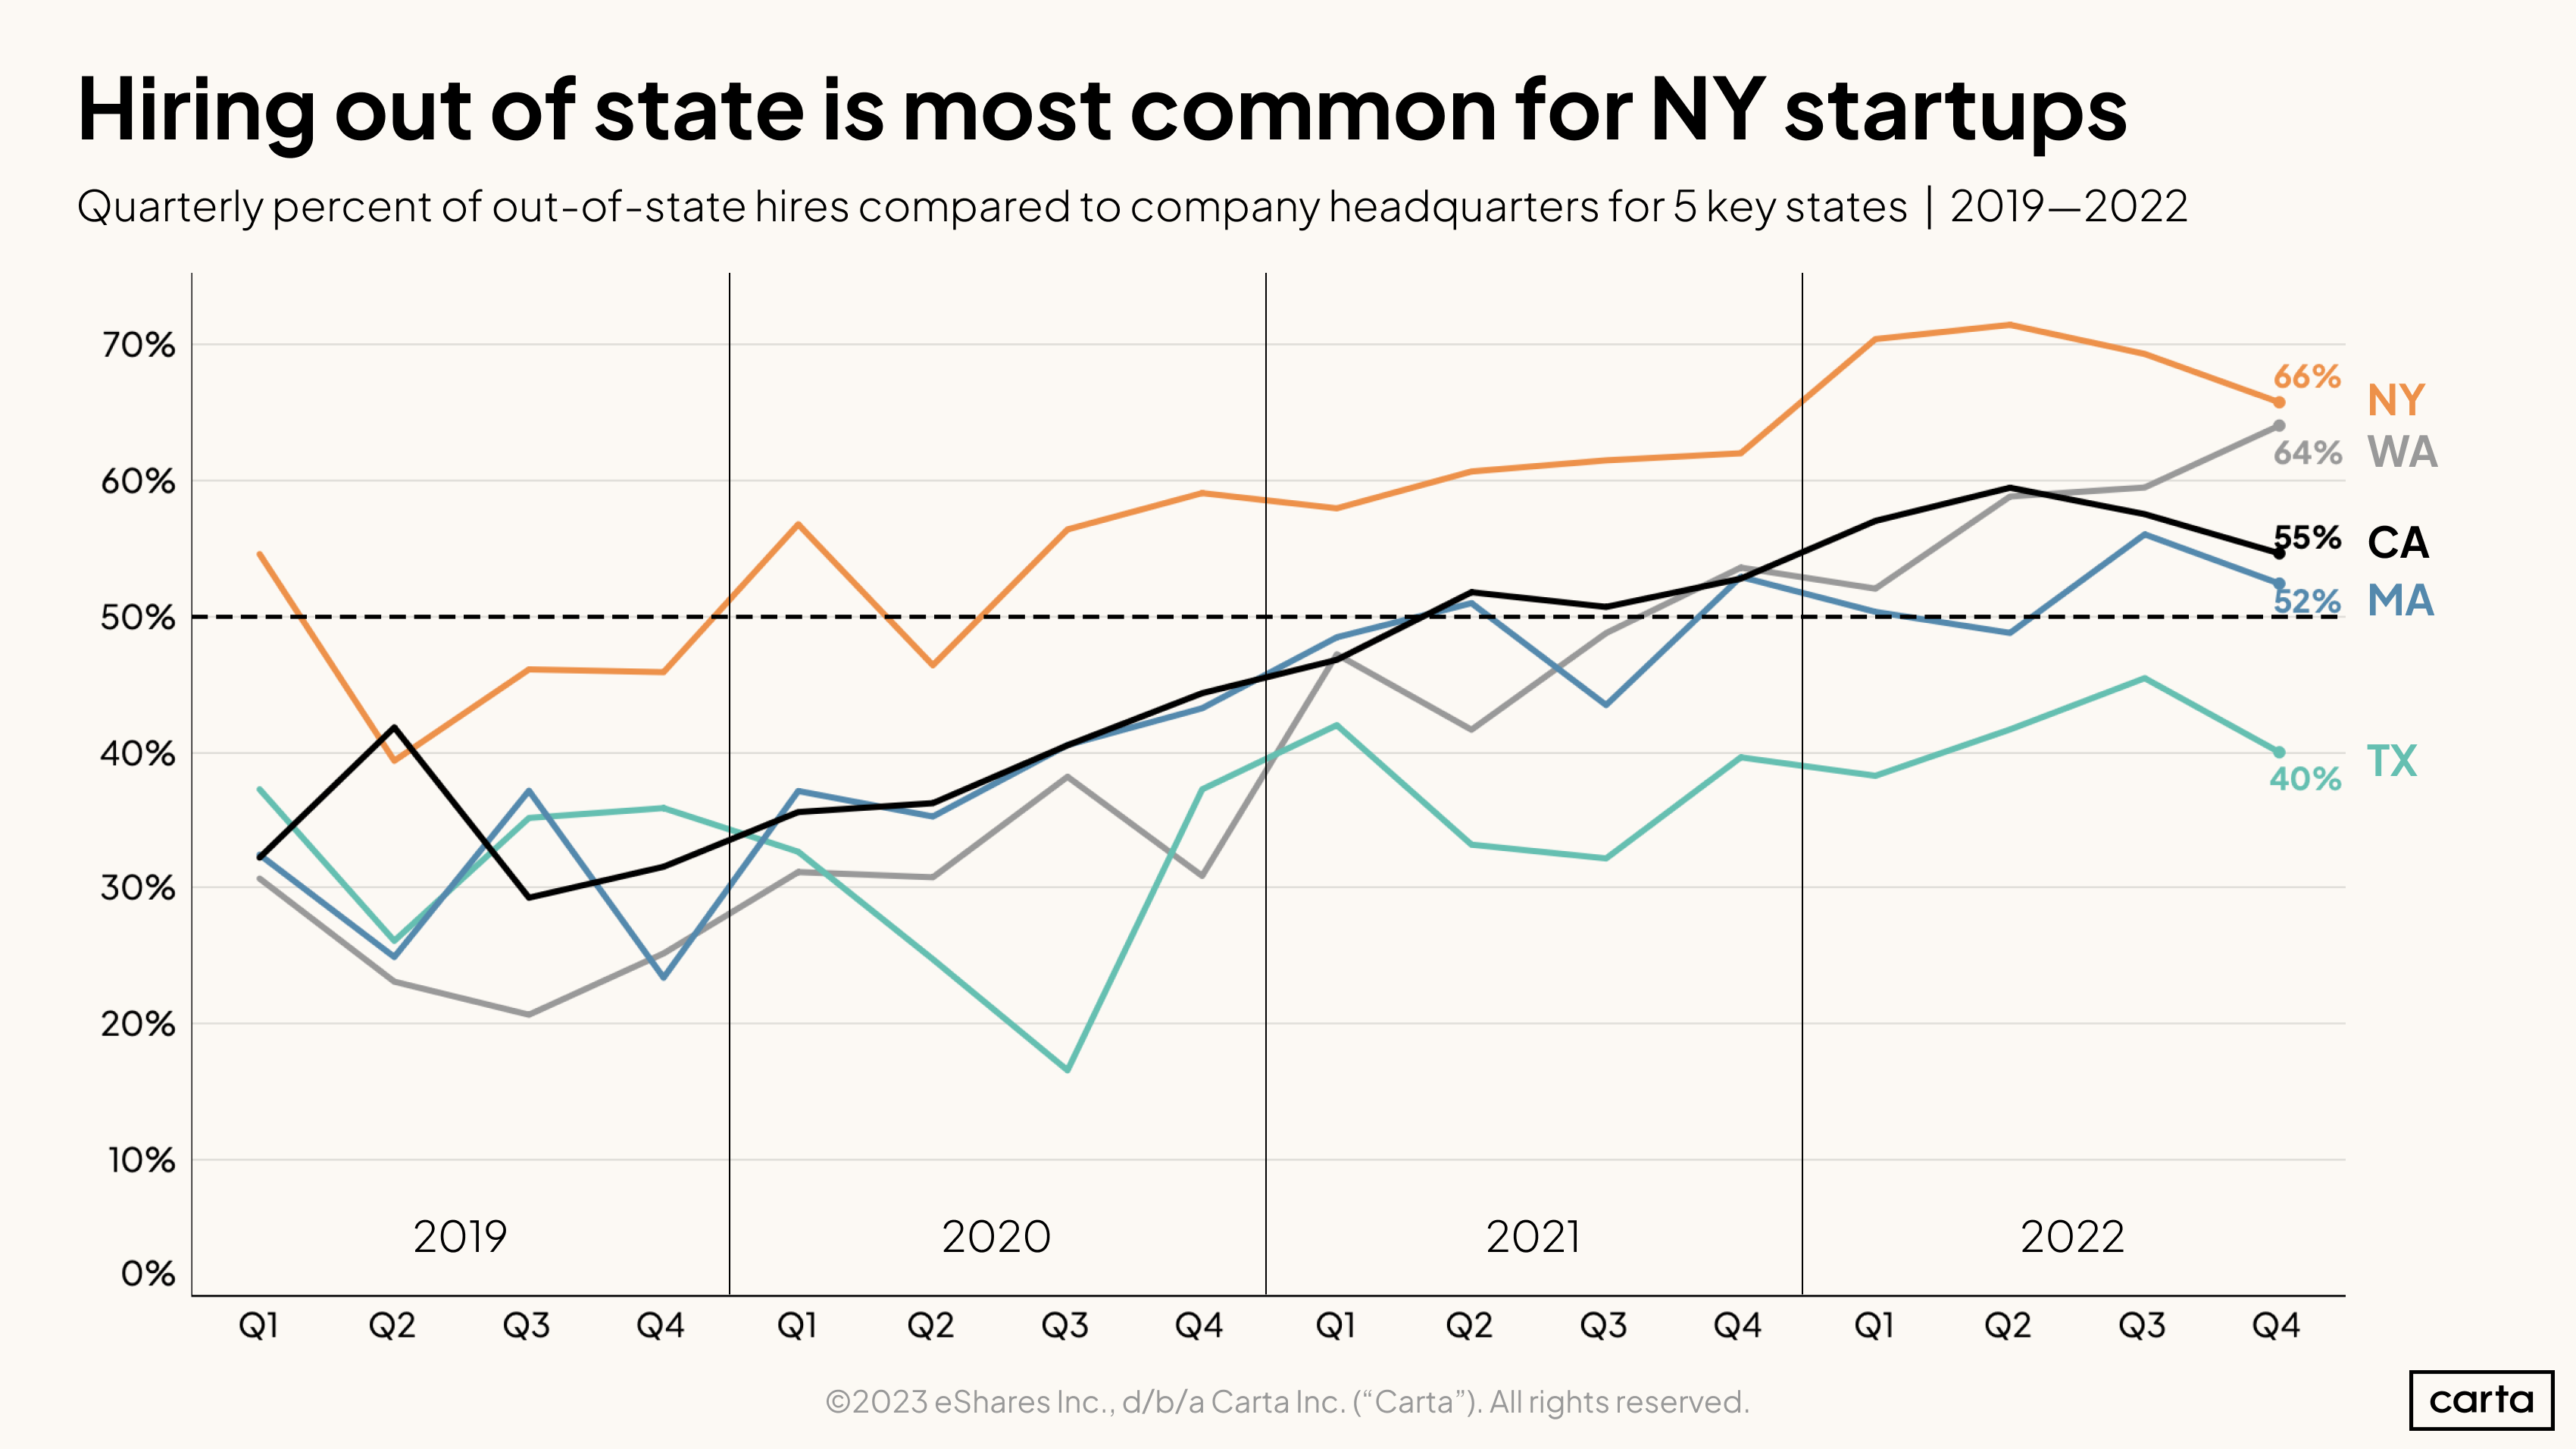 Quarterly percent of out-of-state hires compared to company headquarters for 5 key states, 2019-2022